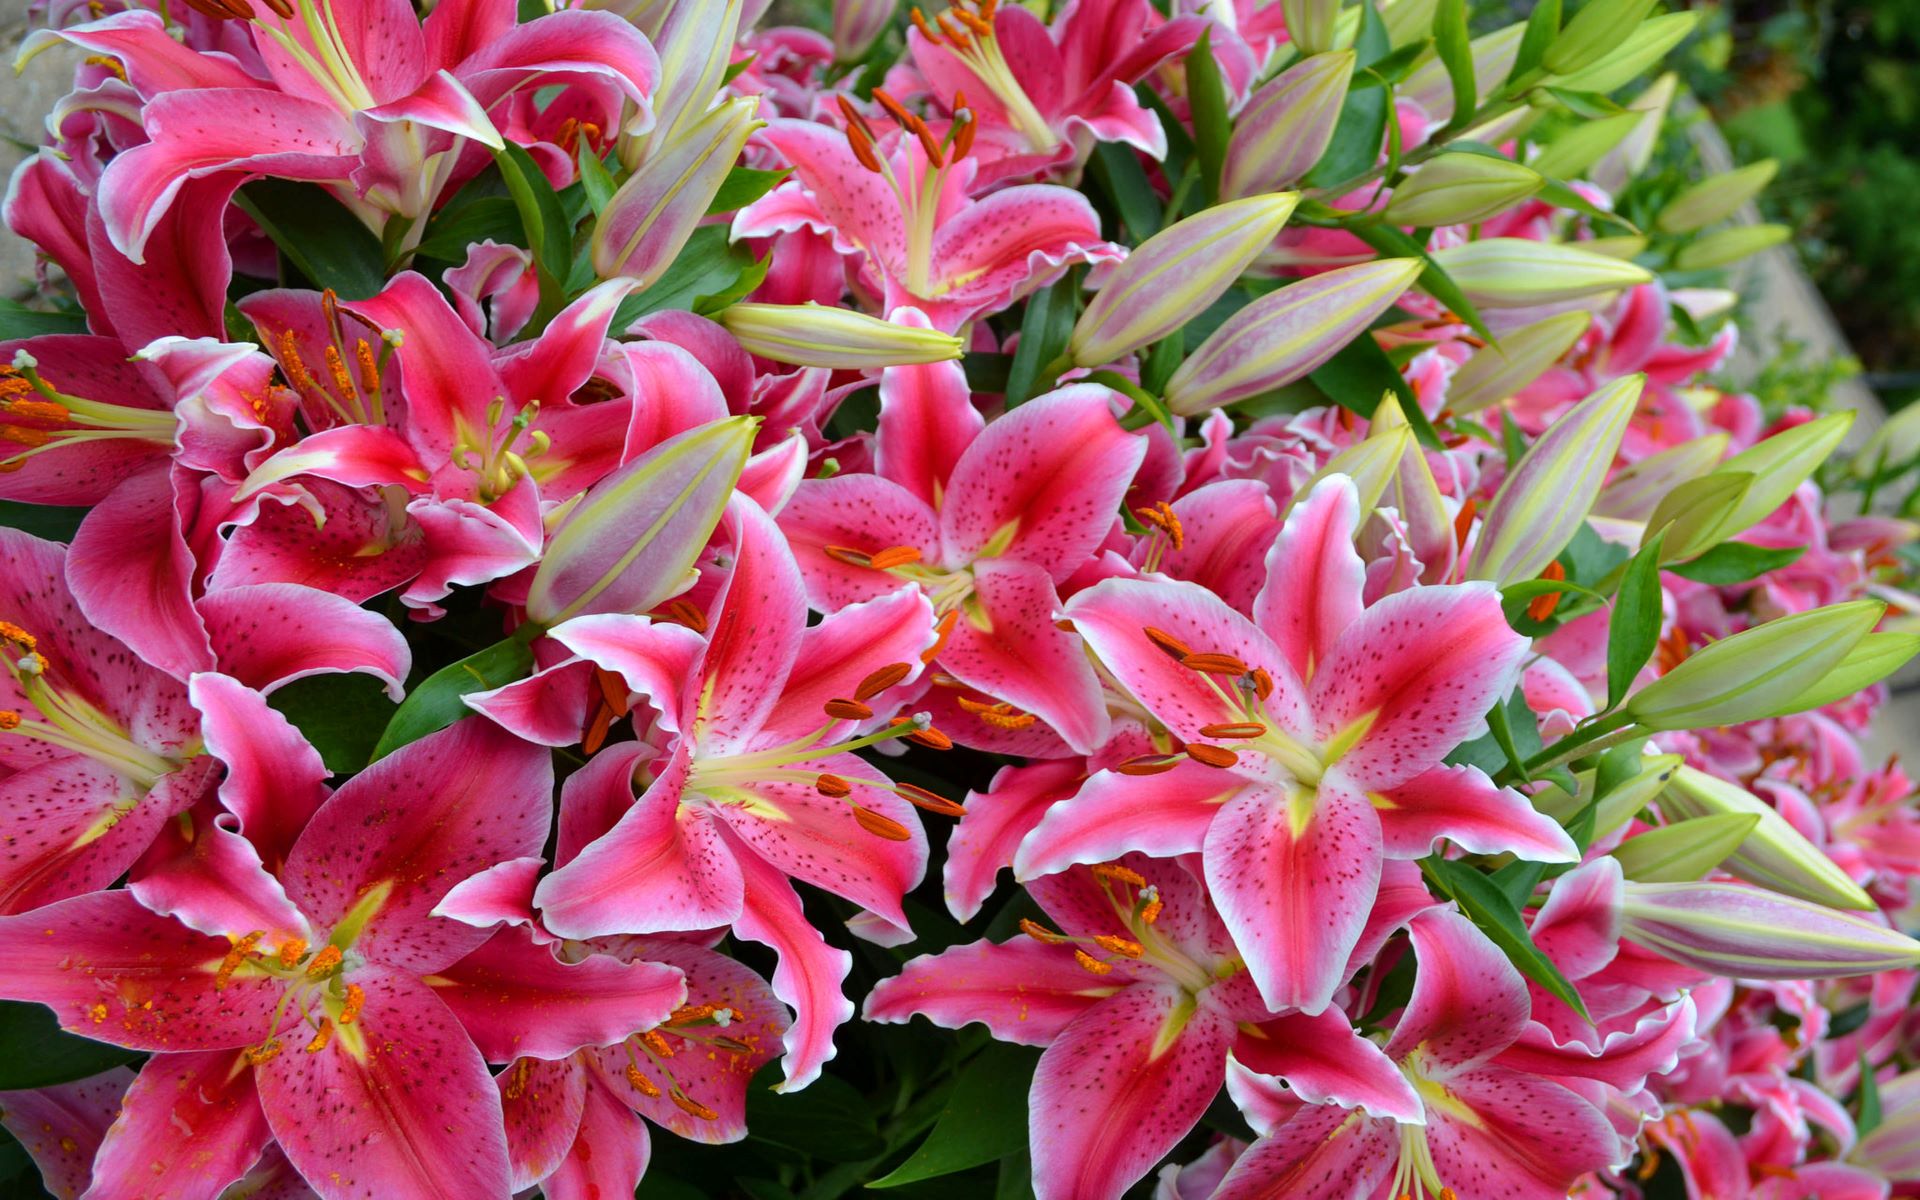 Lilies for all the beauties